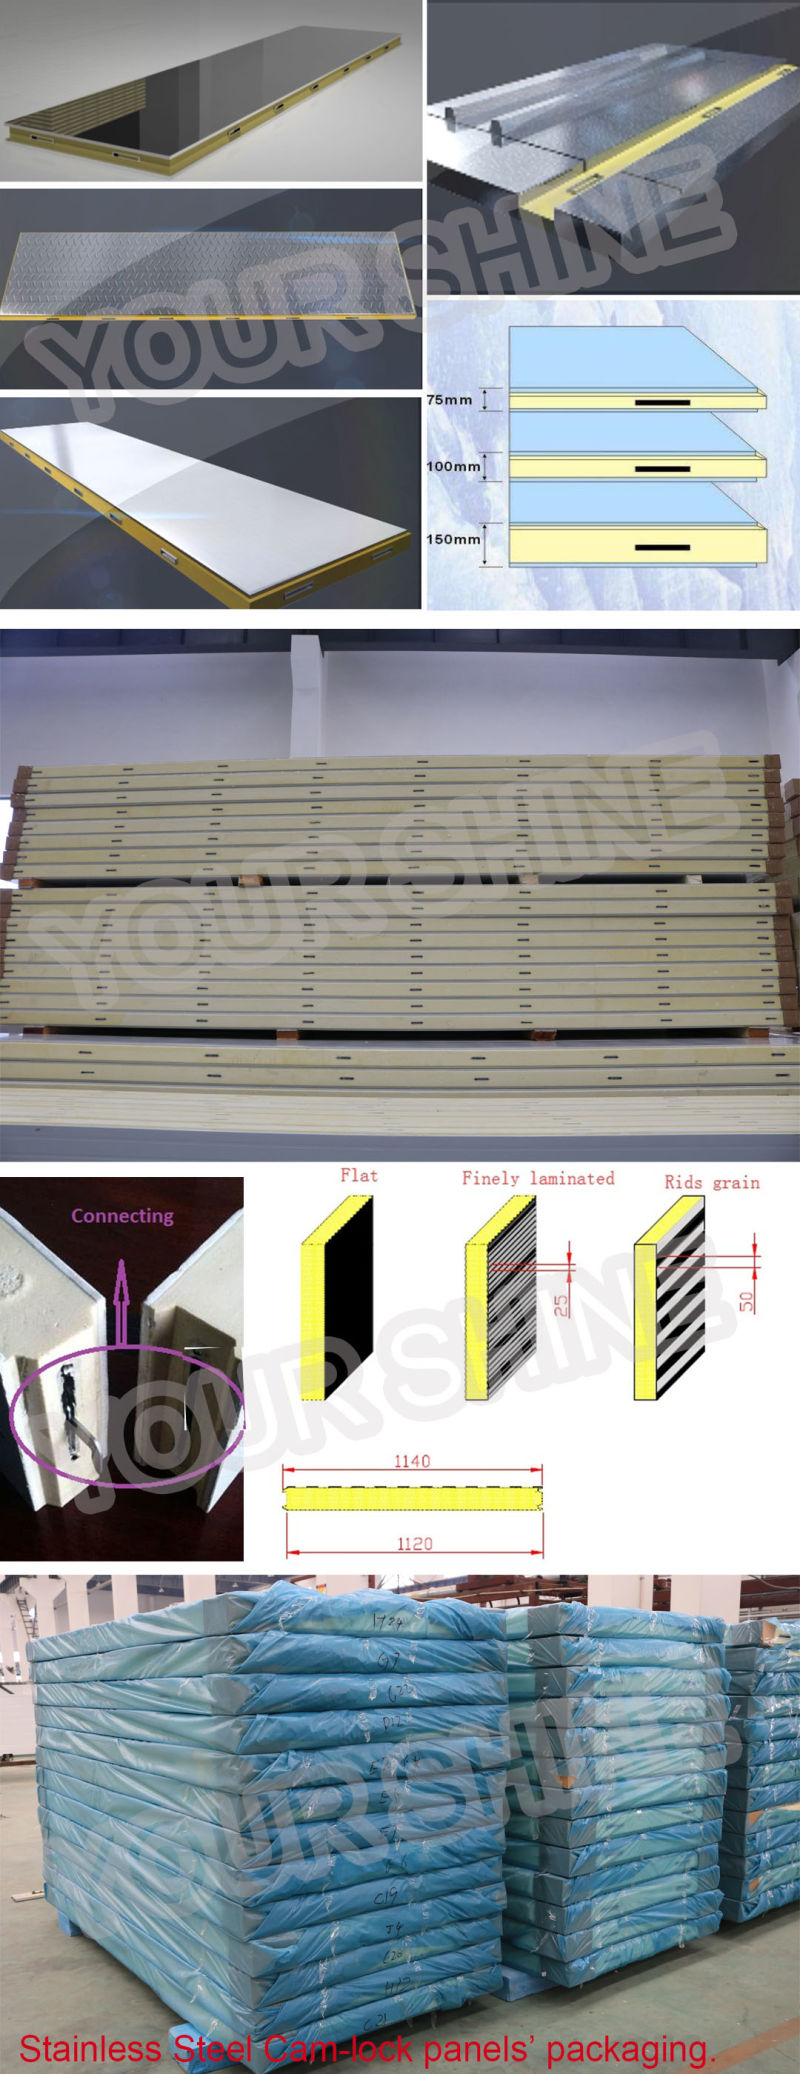 Sandwich Panels for Cold Room Insulation Panels in The Philippines PU Insulation Panel Cold Room